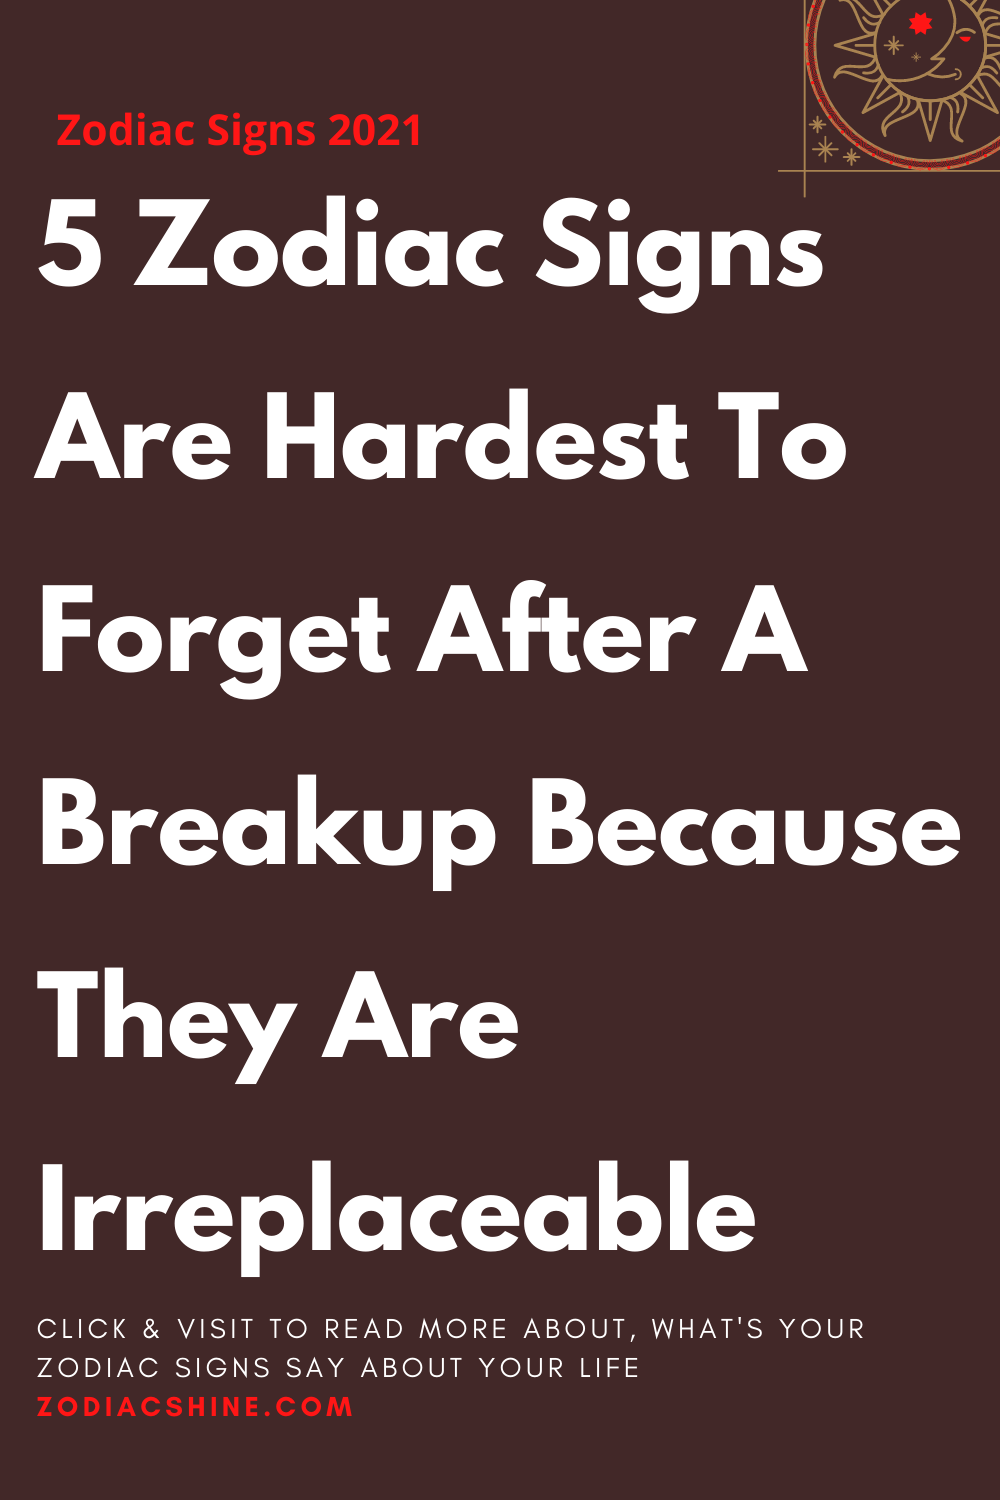 5 Zodiac Signs Are Hardest To Forget After A Breakup Because They Are Irreplaceable